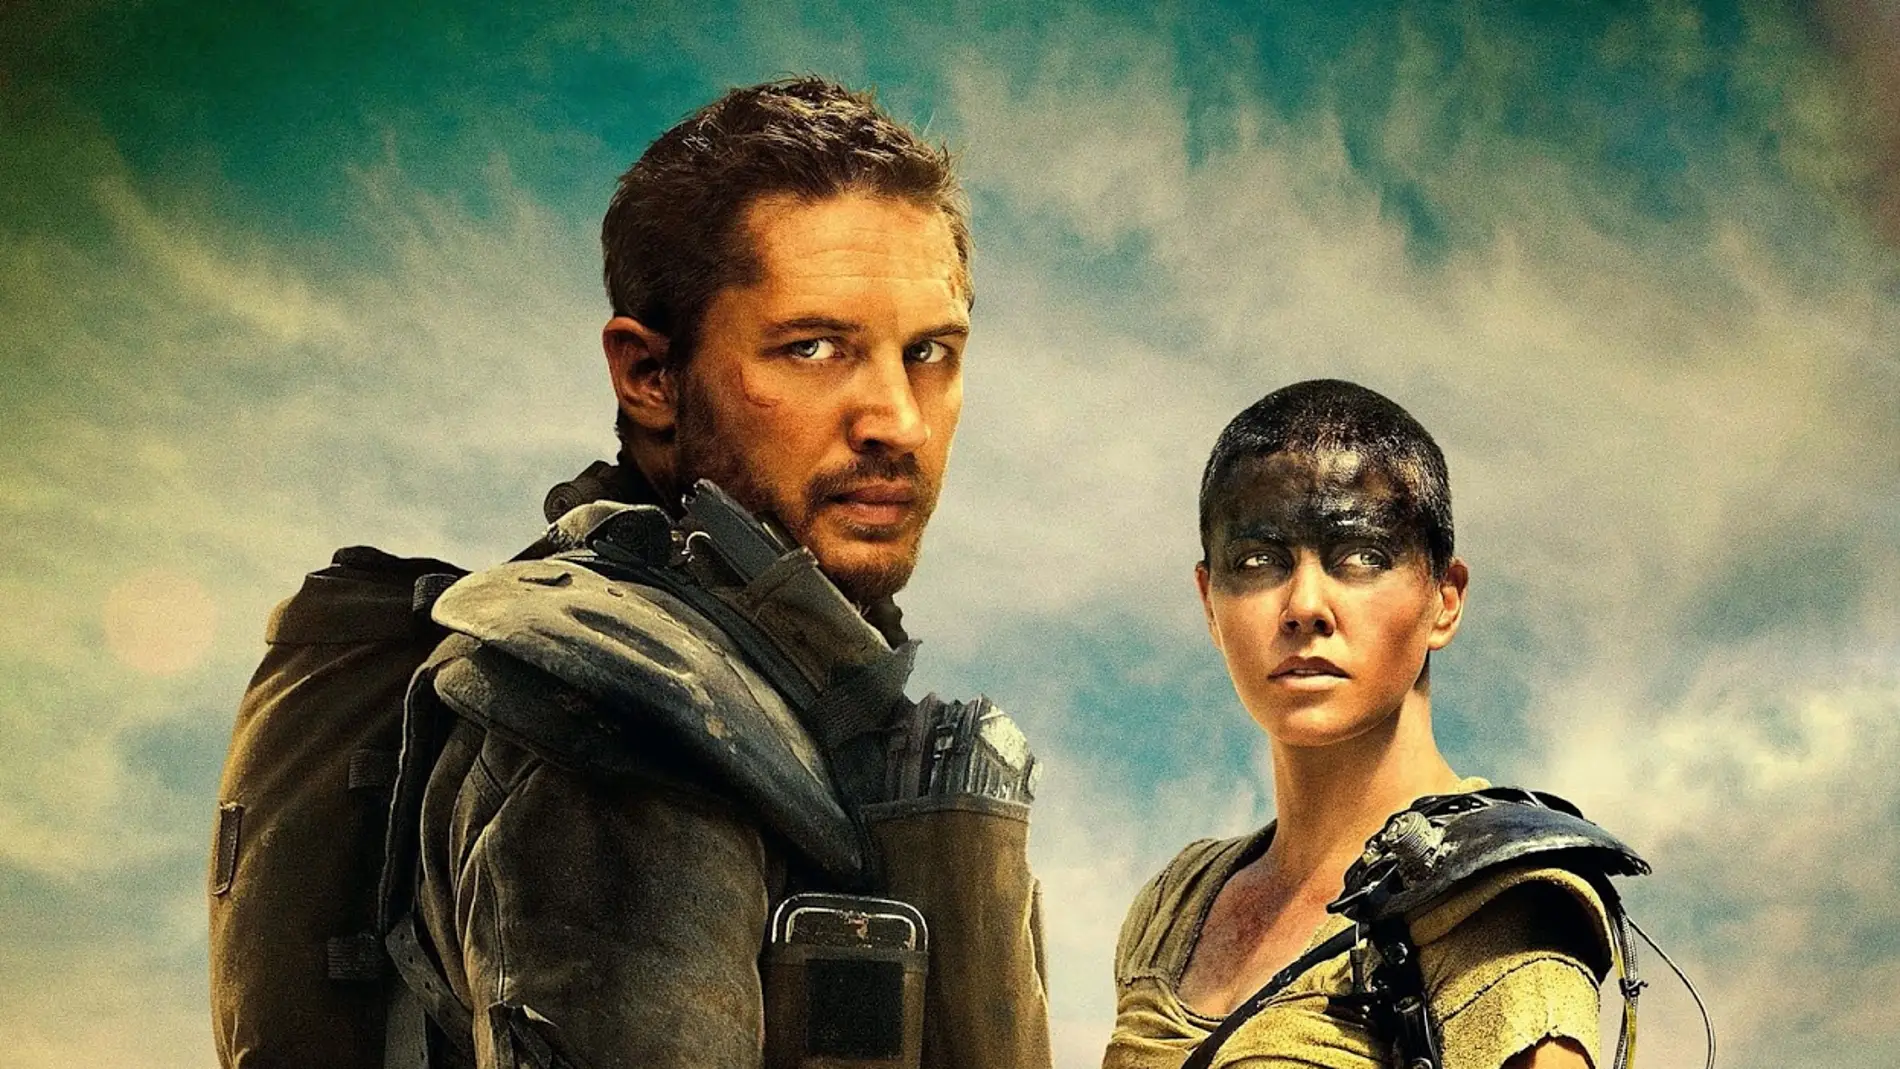 Tom Hardy y Charlize Theron en 'Mad Max'